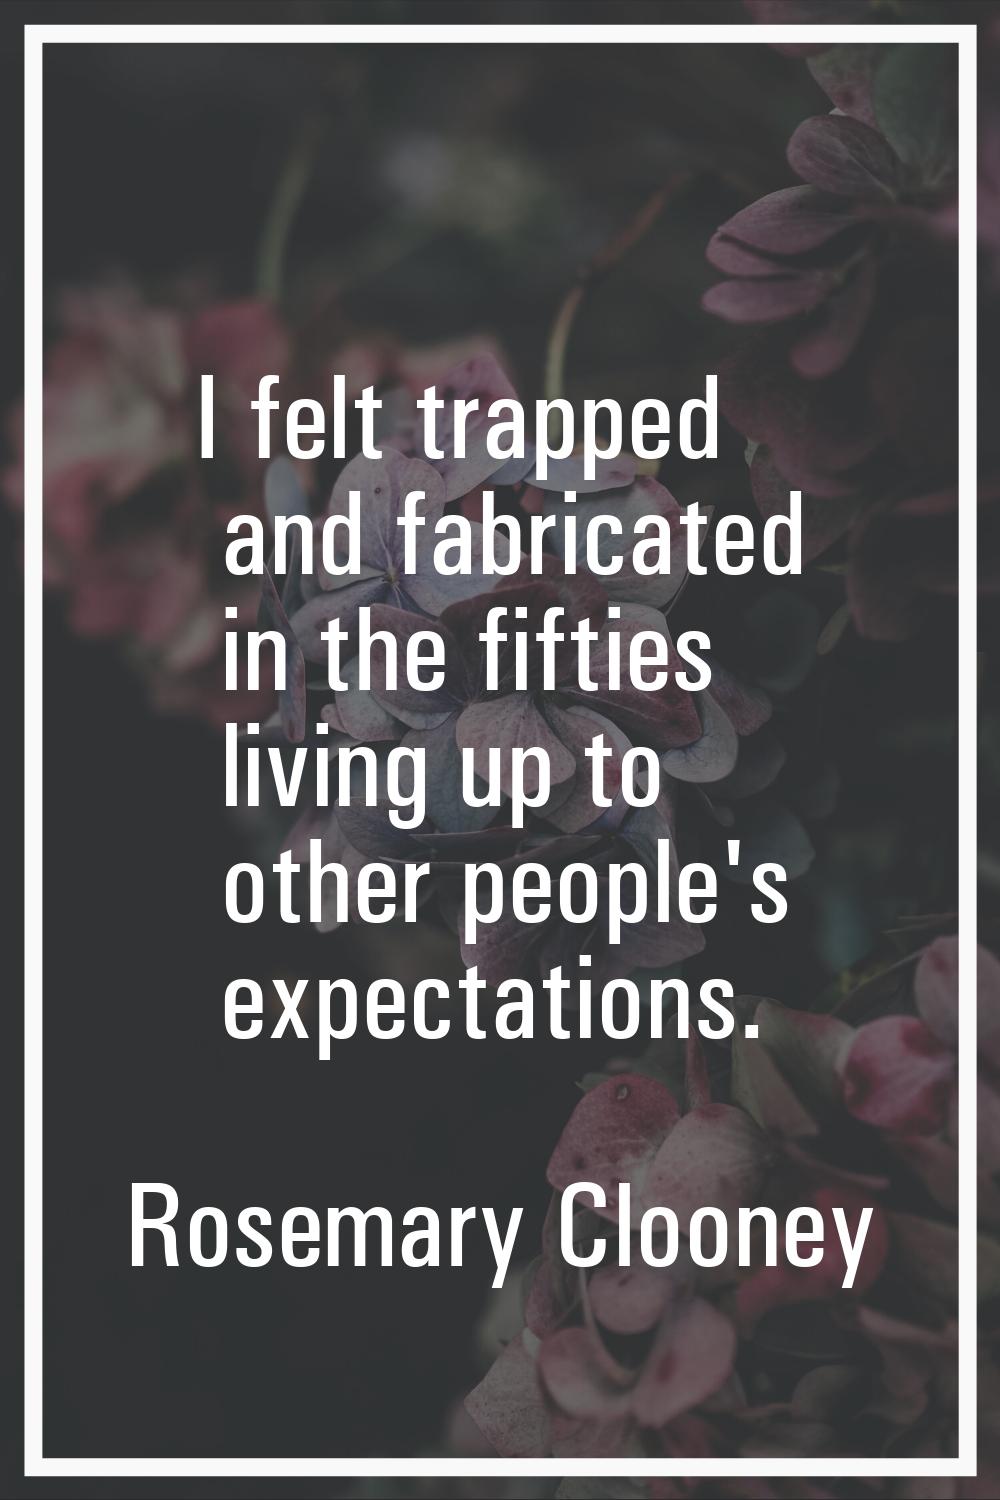 I felt trapped and fabricated in the fifties living up to other people's expectations.